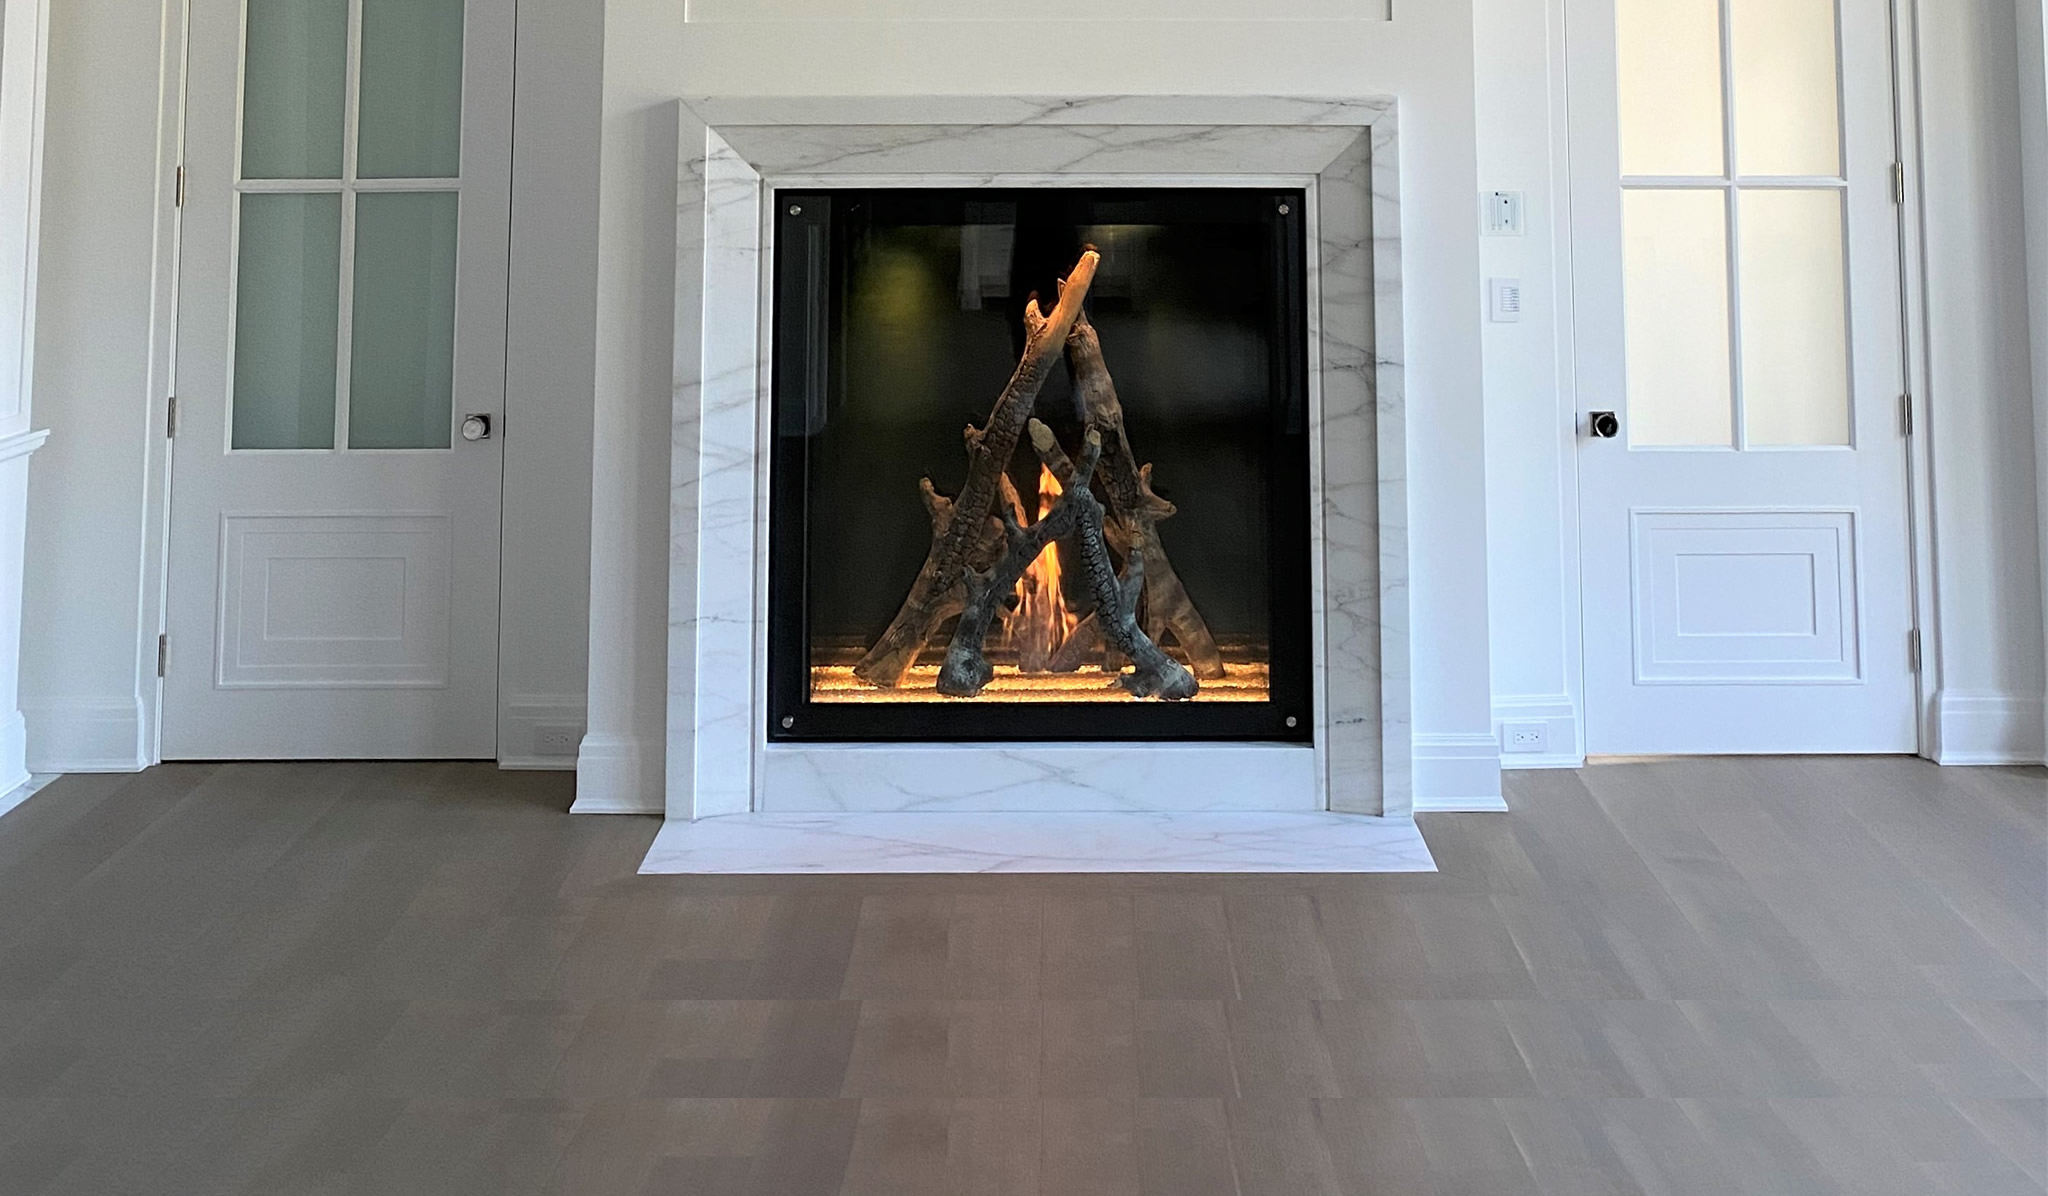 Fireplace Outdoor Living Home, Electric Fireplace Huntington Ny